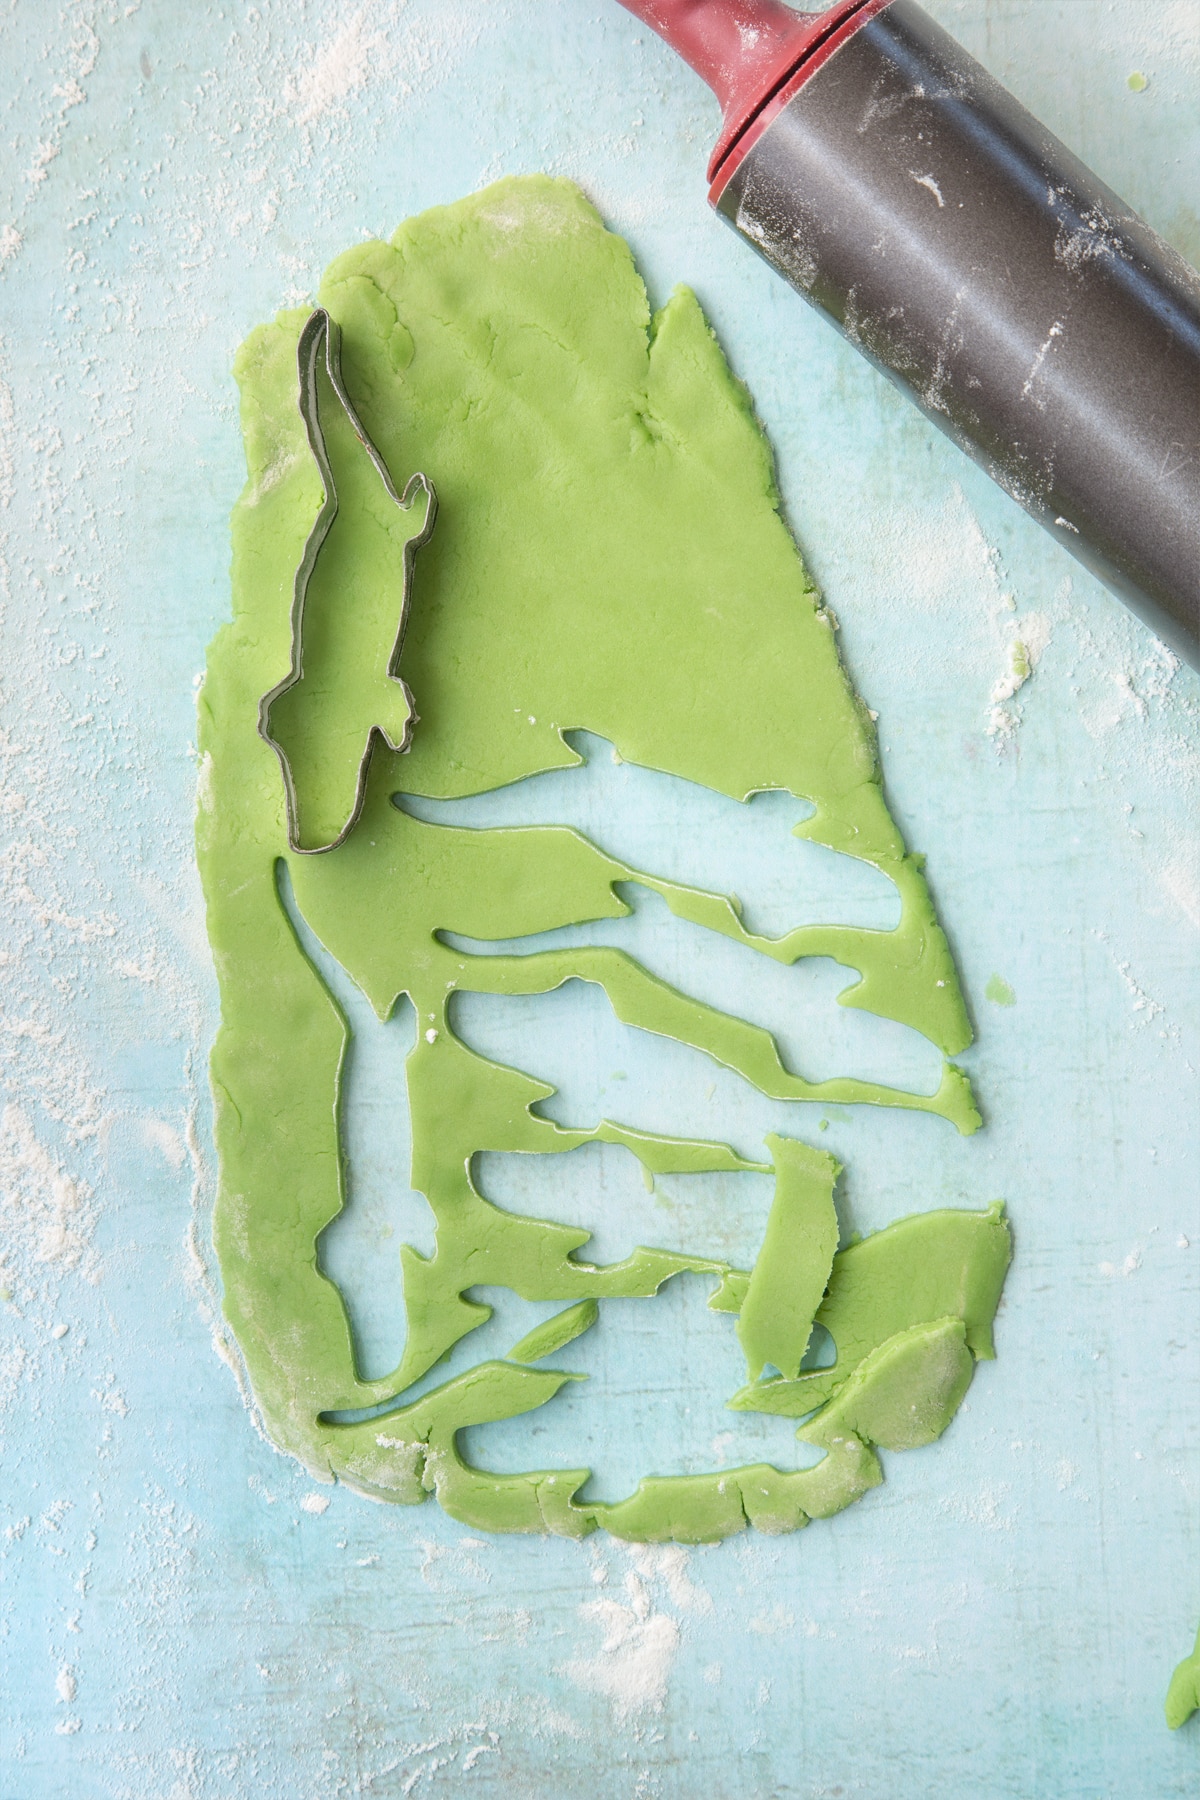 Dinosaur shaped cookie cutter cutting out from the green pastry.